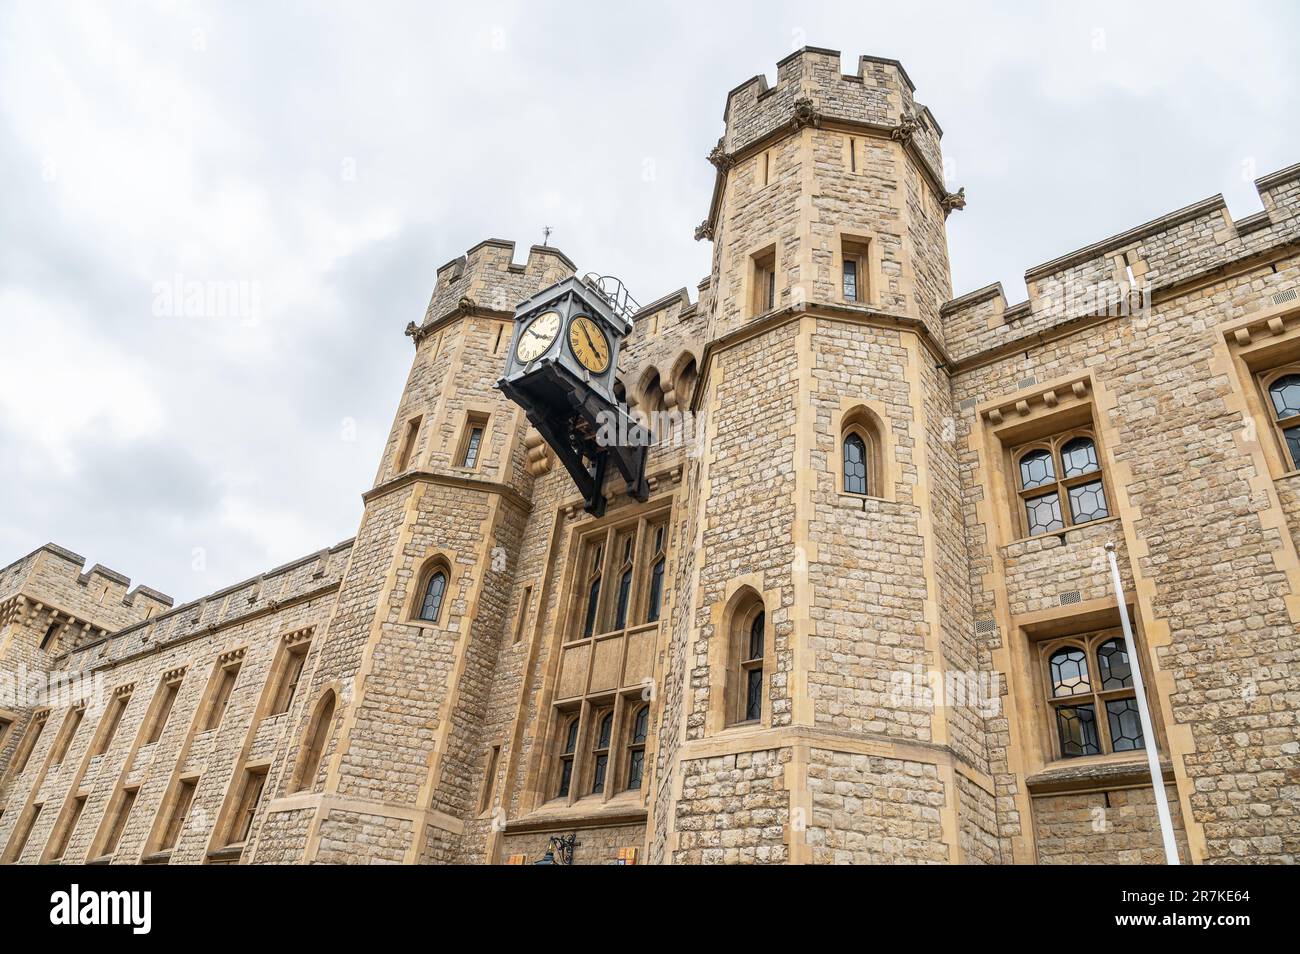 The clock over the entrance to the Waterloo Barracks at the Tower of London, London, England Stock Photo